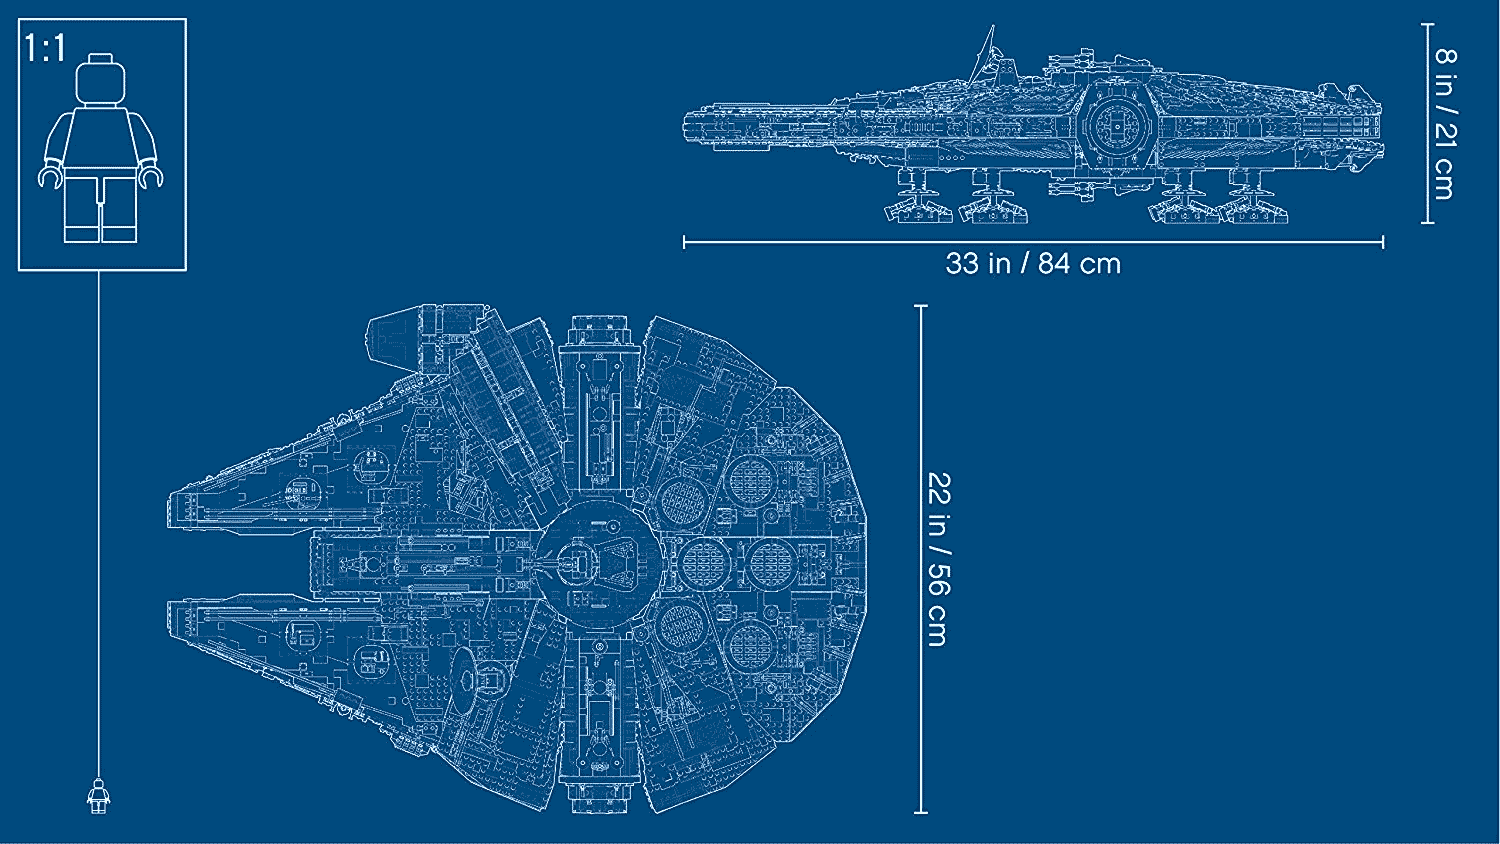 The Millennium Falcon Lego Set is Back in Stock on Amazon (2018)